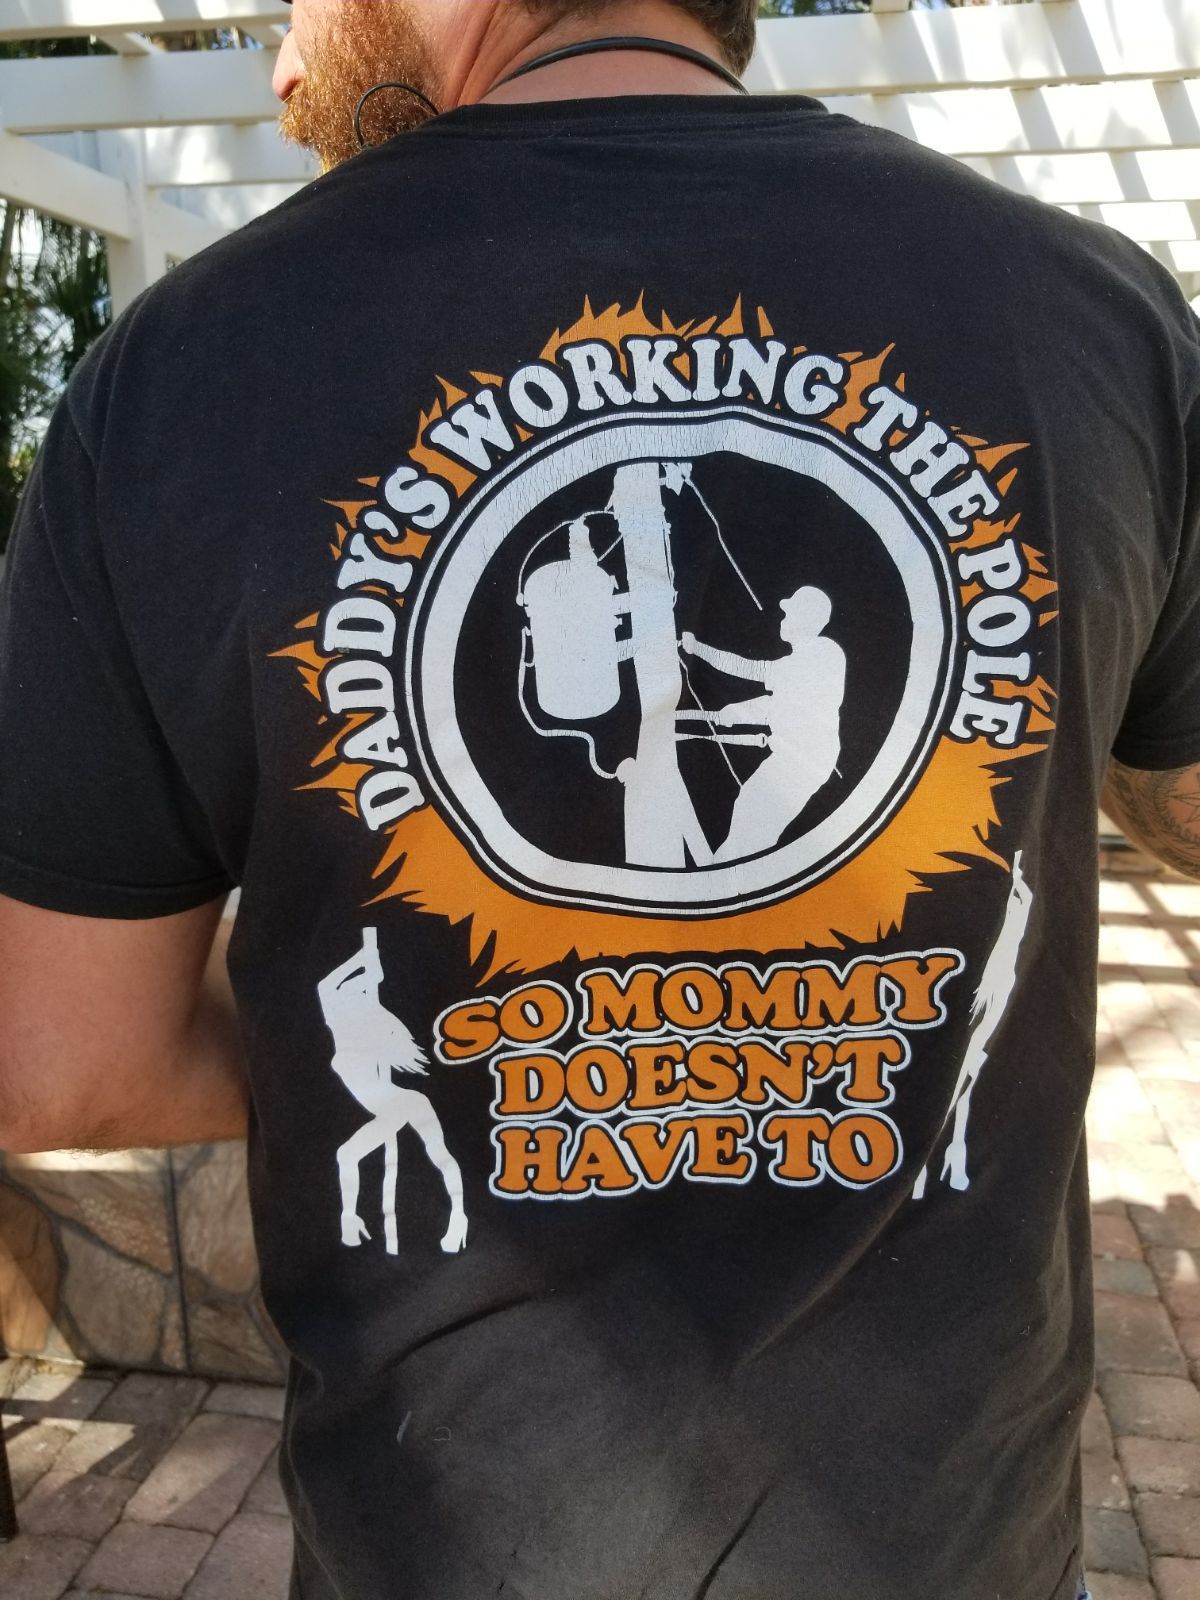 Pic of man wearing shirt that says Daddy's working the pole so mommy don't have to.